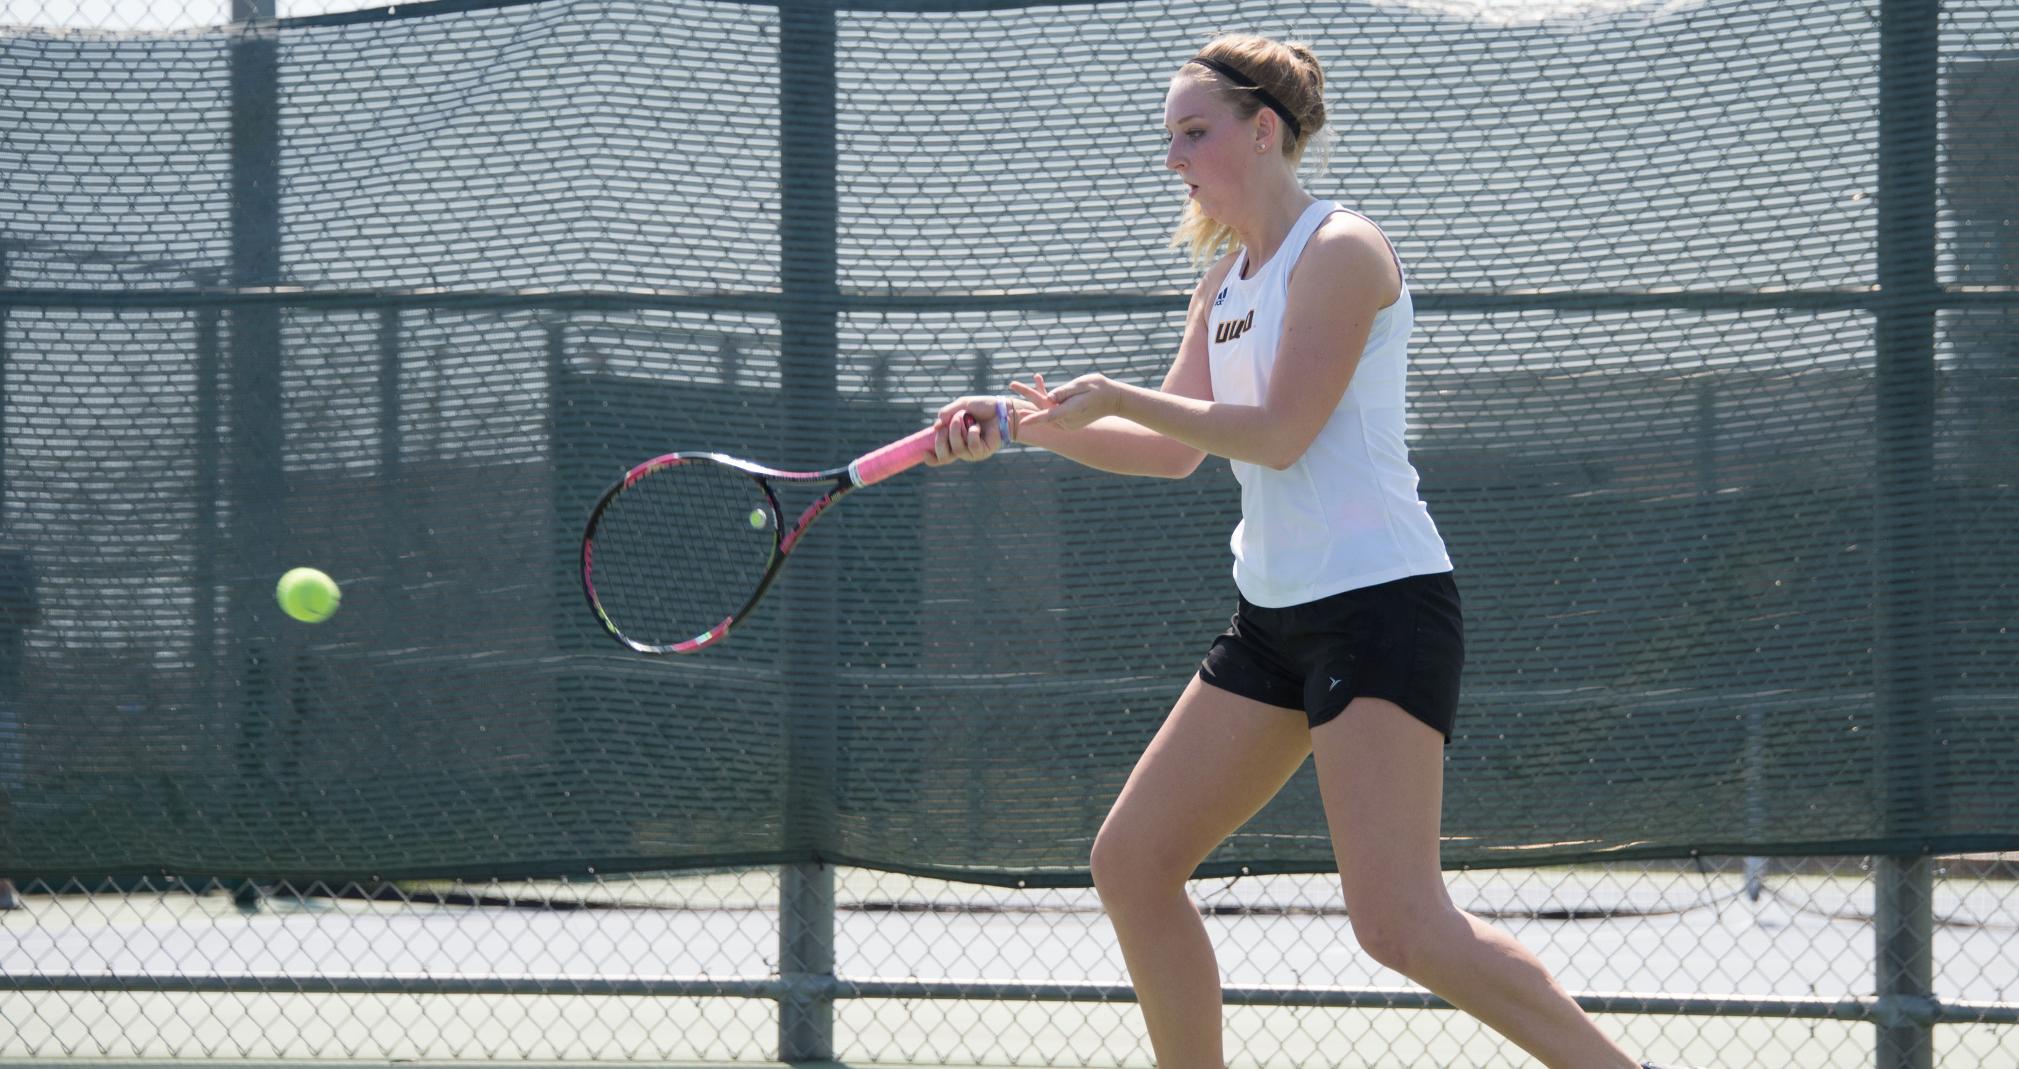 Bailey Sagen was involved in victories for the Titans at both No. 1 singles and No. 1 doubles.